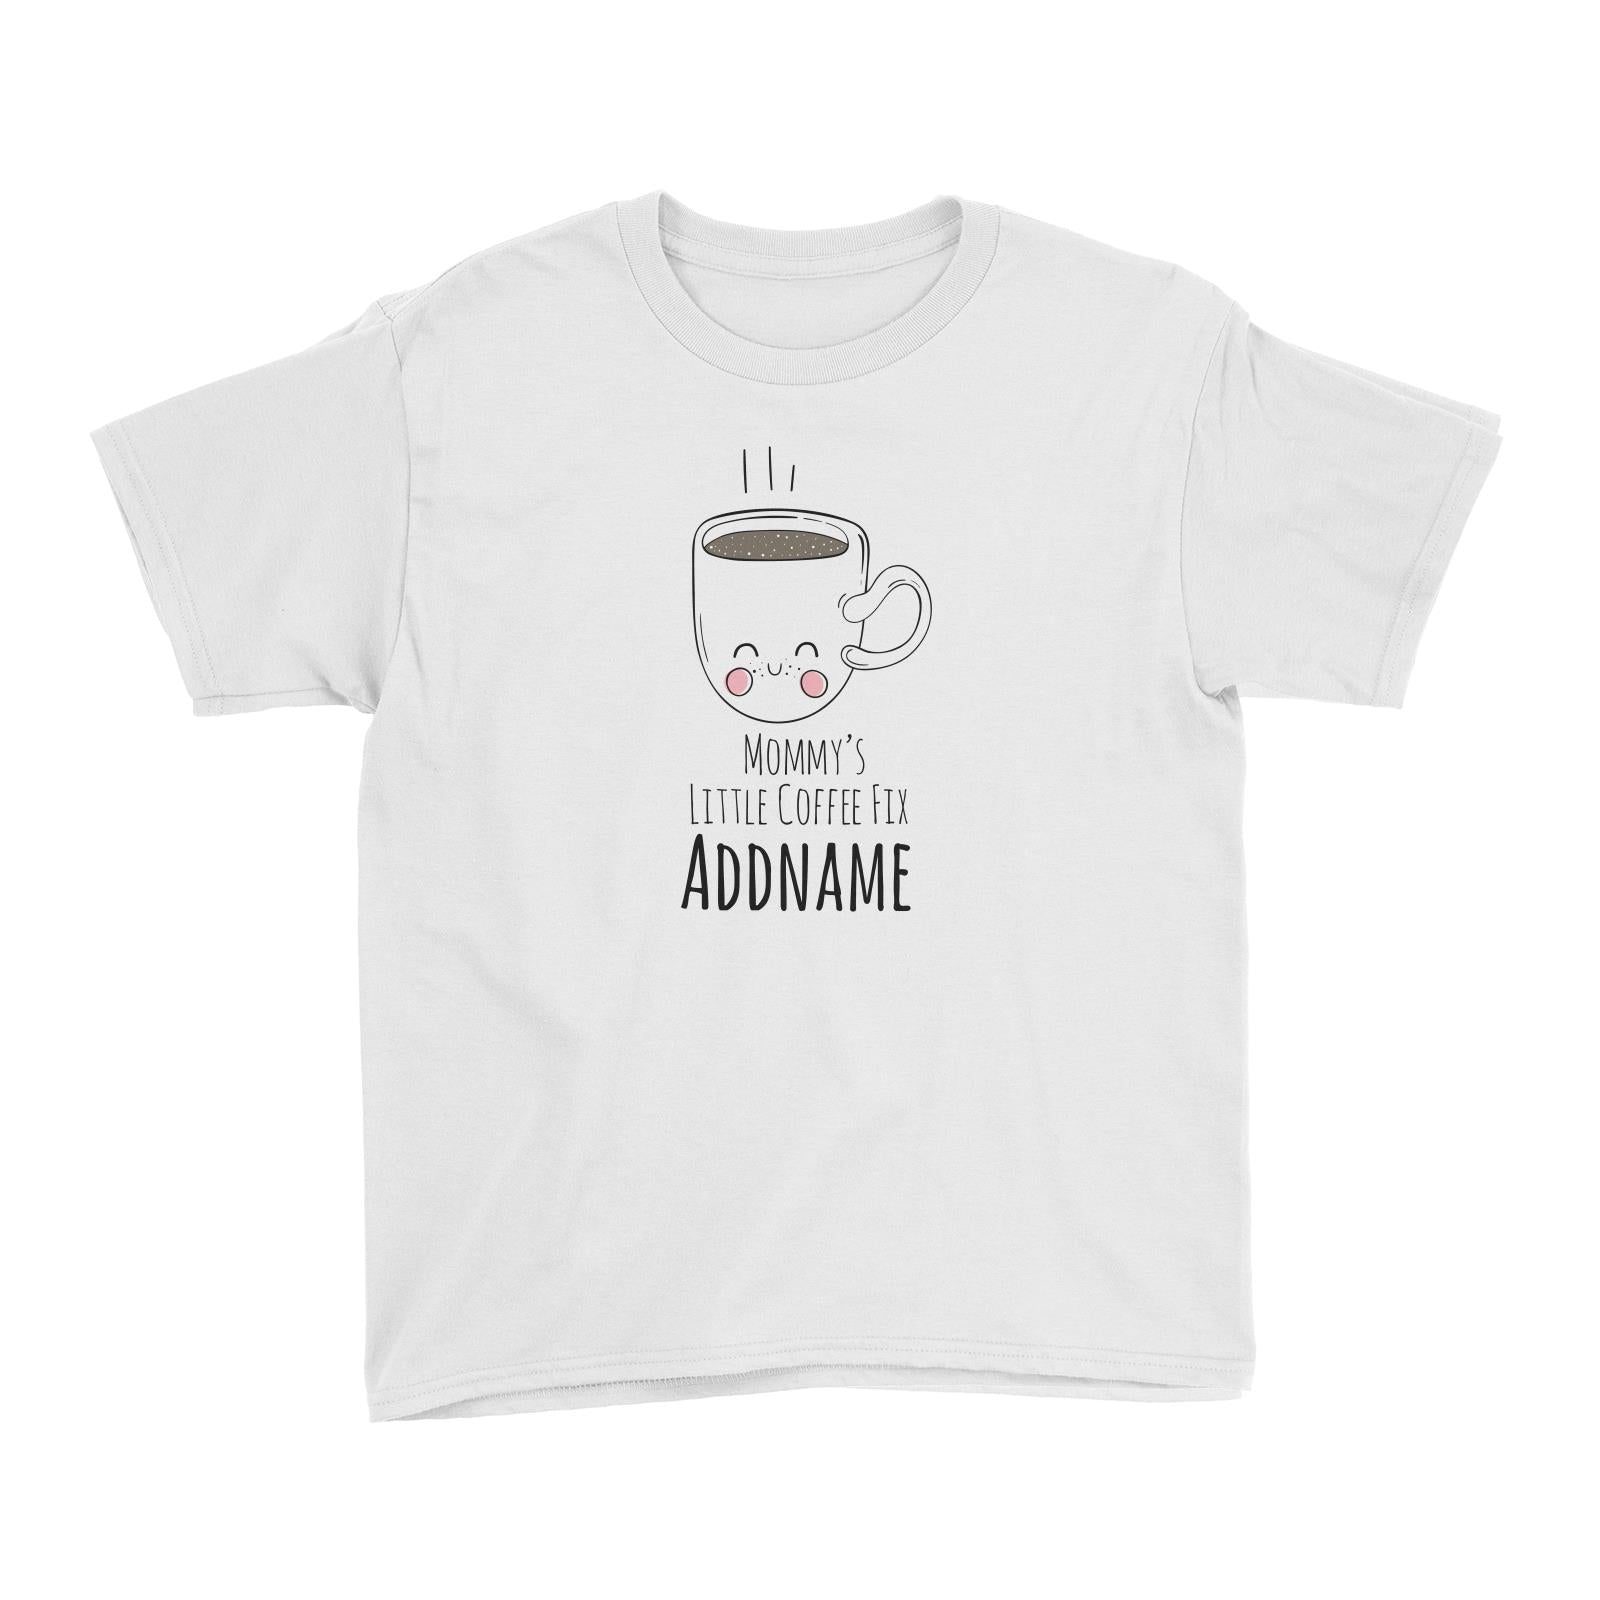 Drawn Sweet Snacks Mommy's Little Coffee Addname Kid's T-Shirt